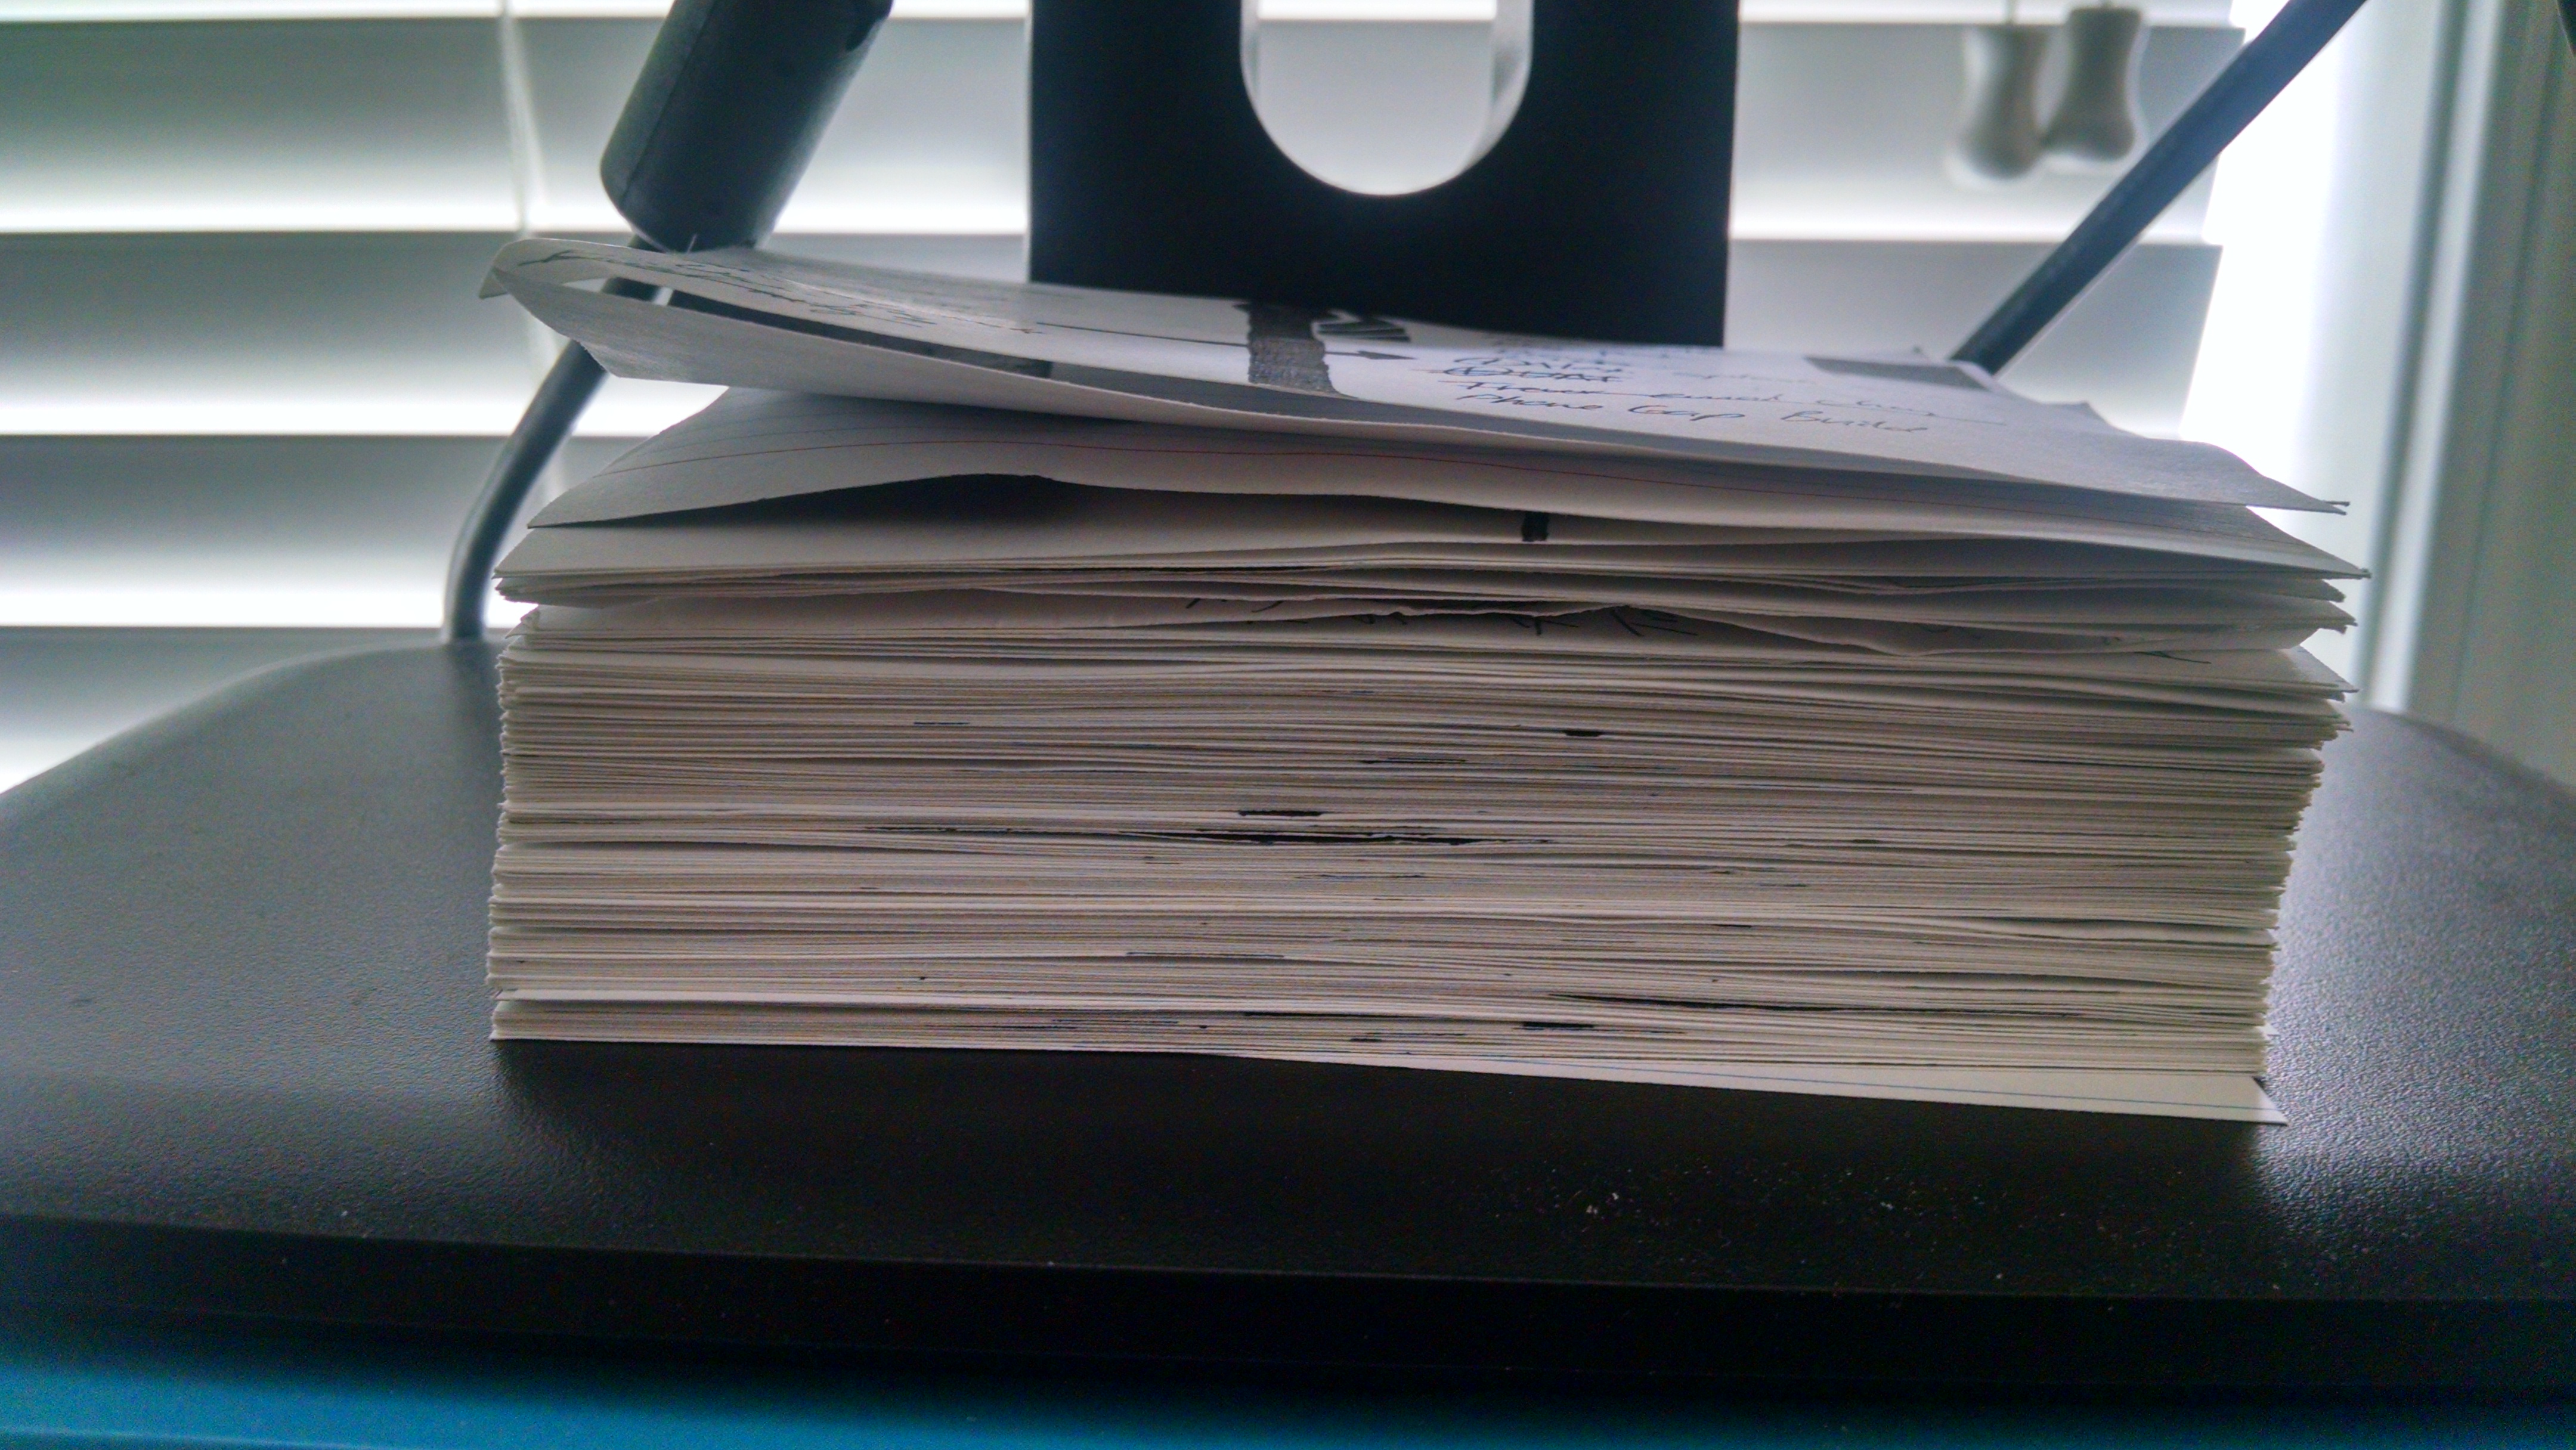 Completed index cards